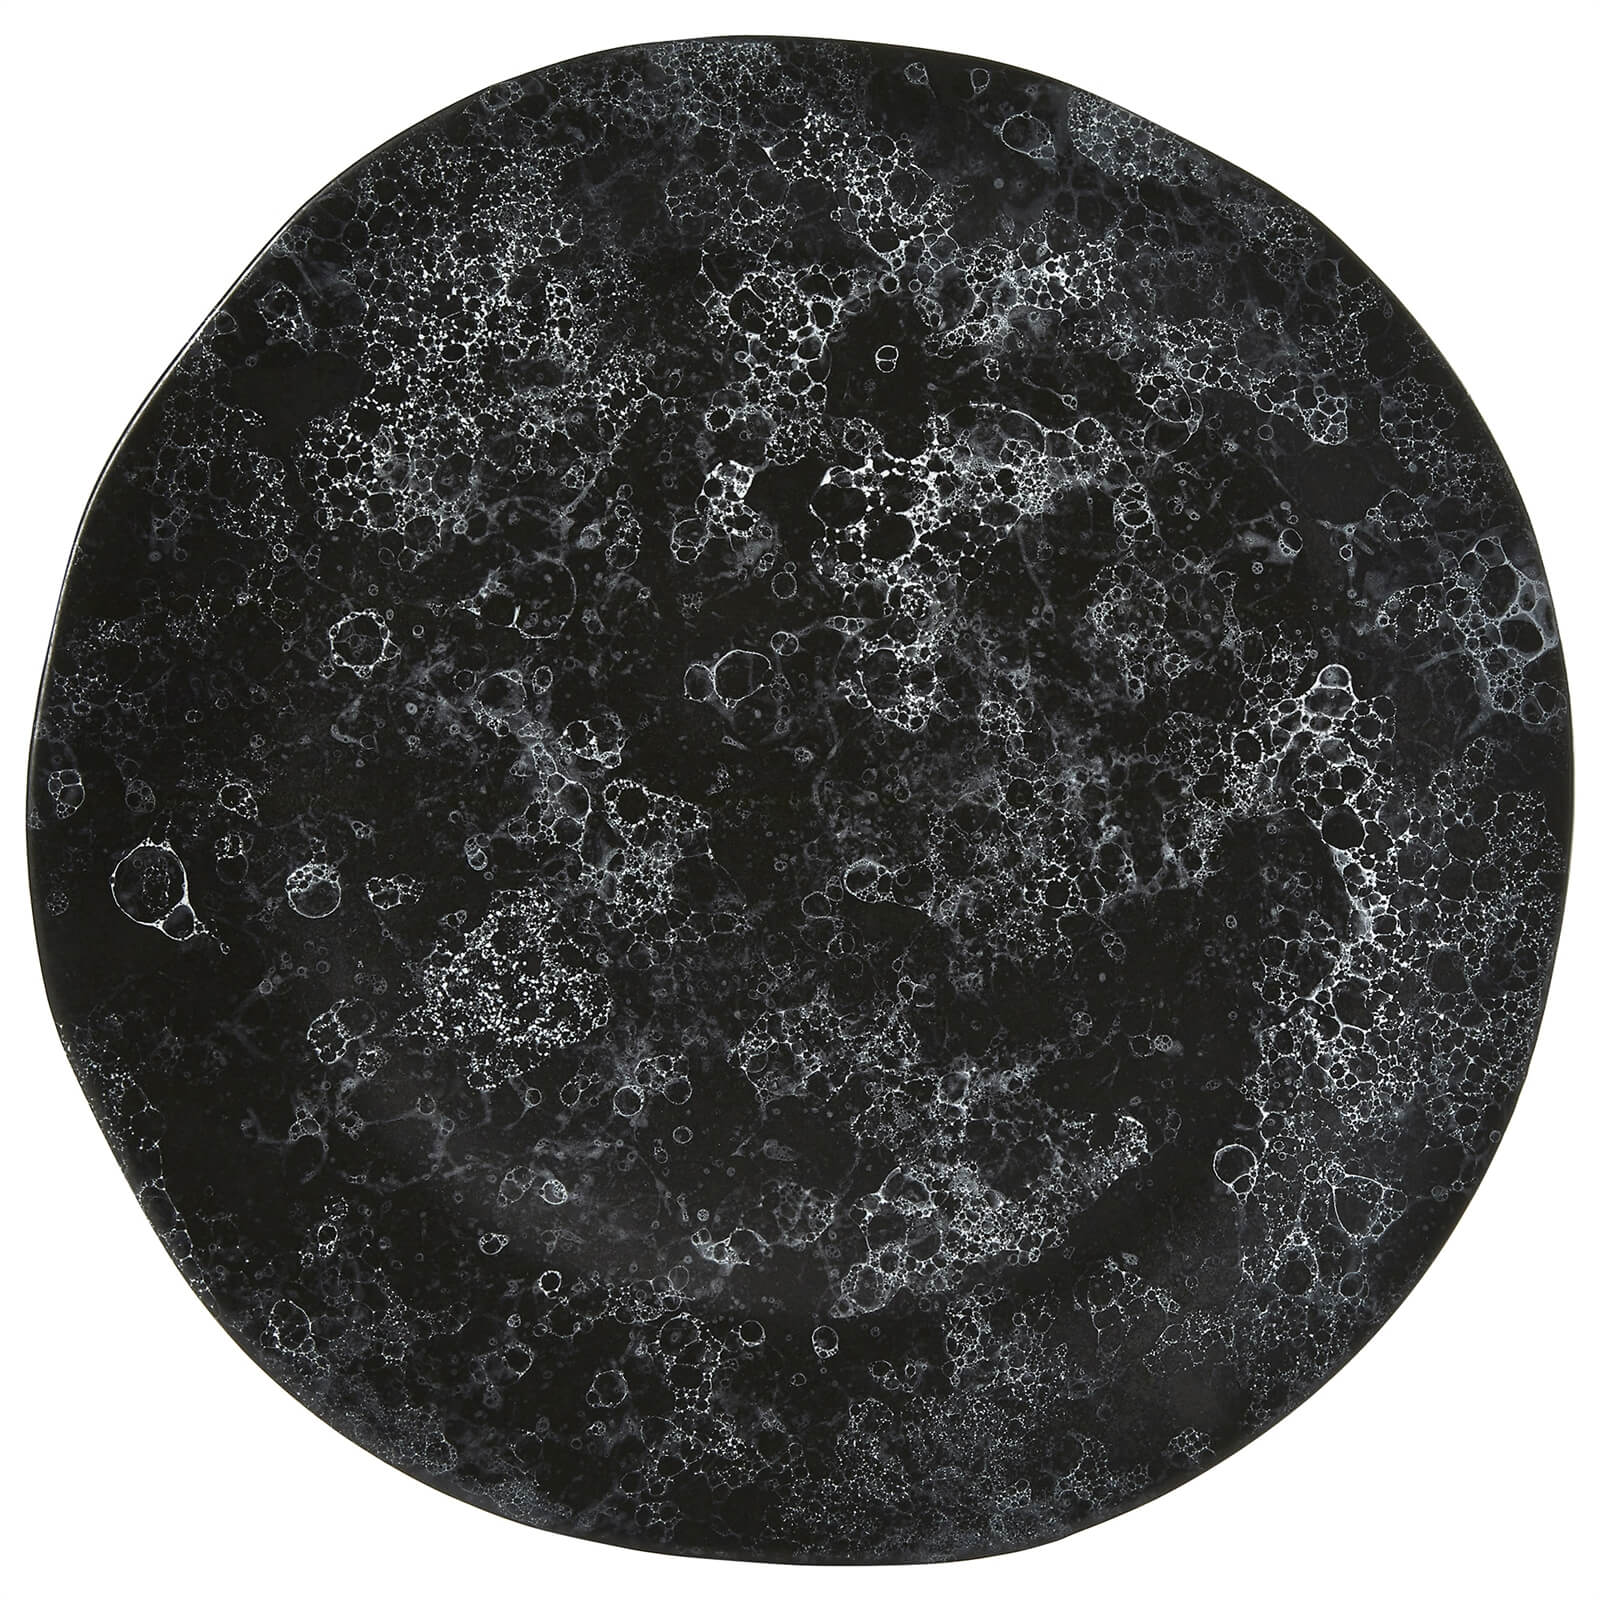 Photo of Hygge Pizza Plate - Black Faux Marble